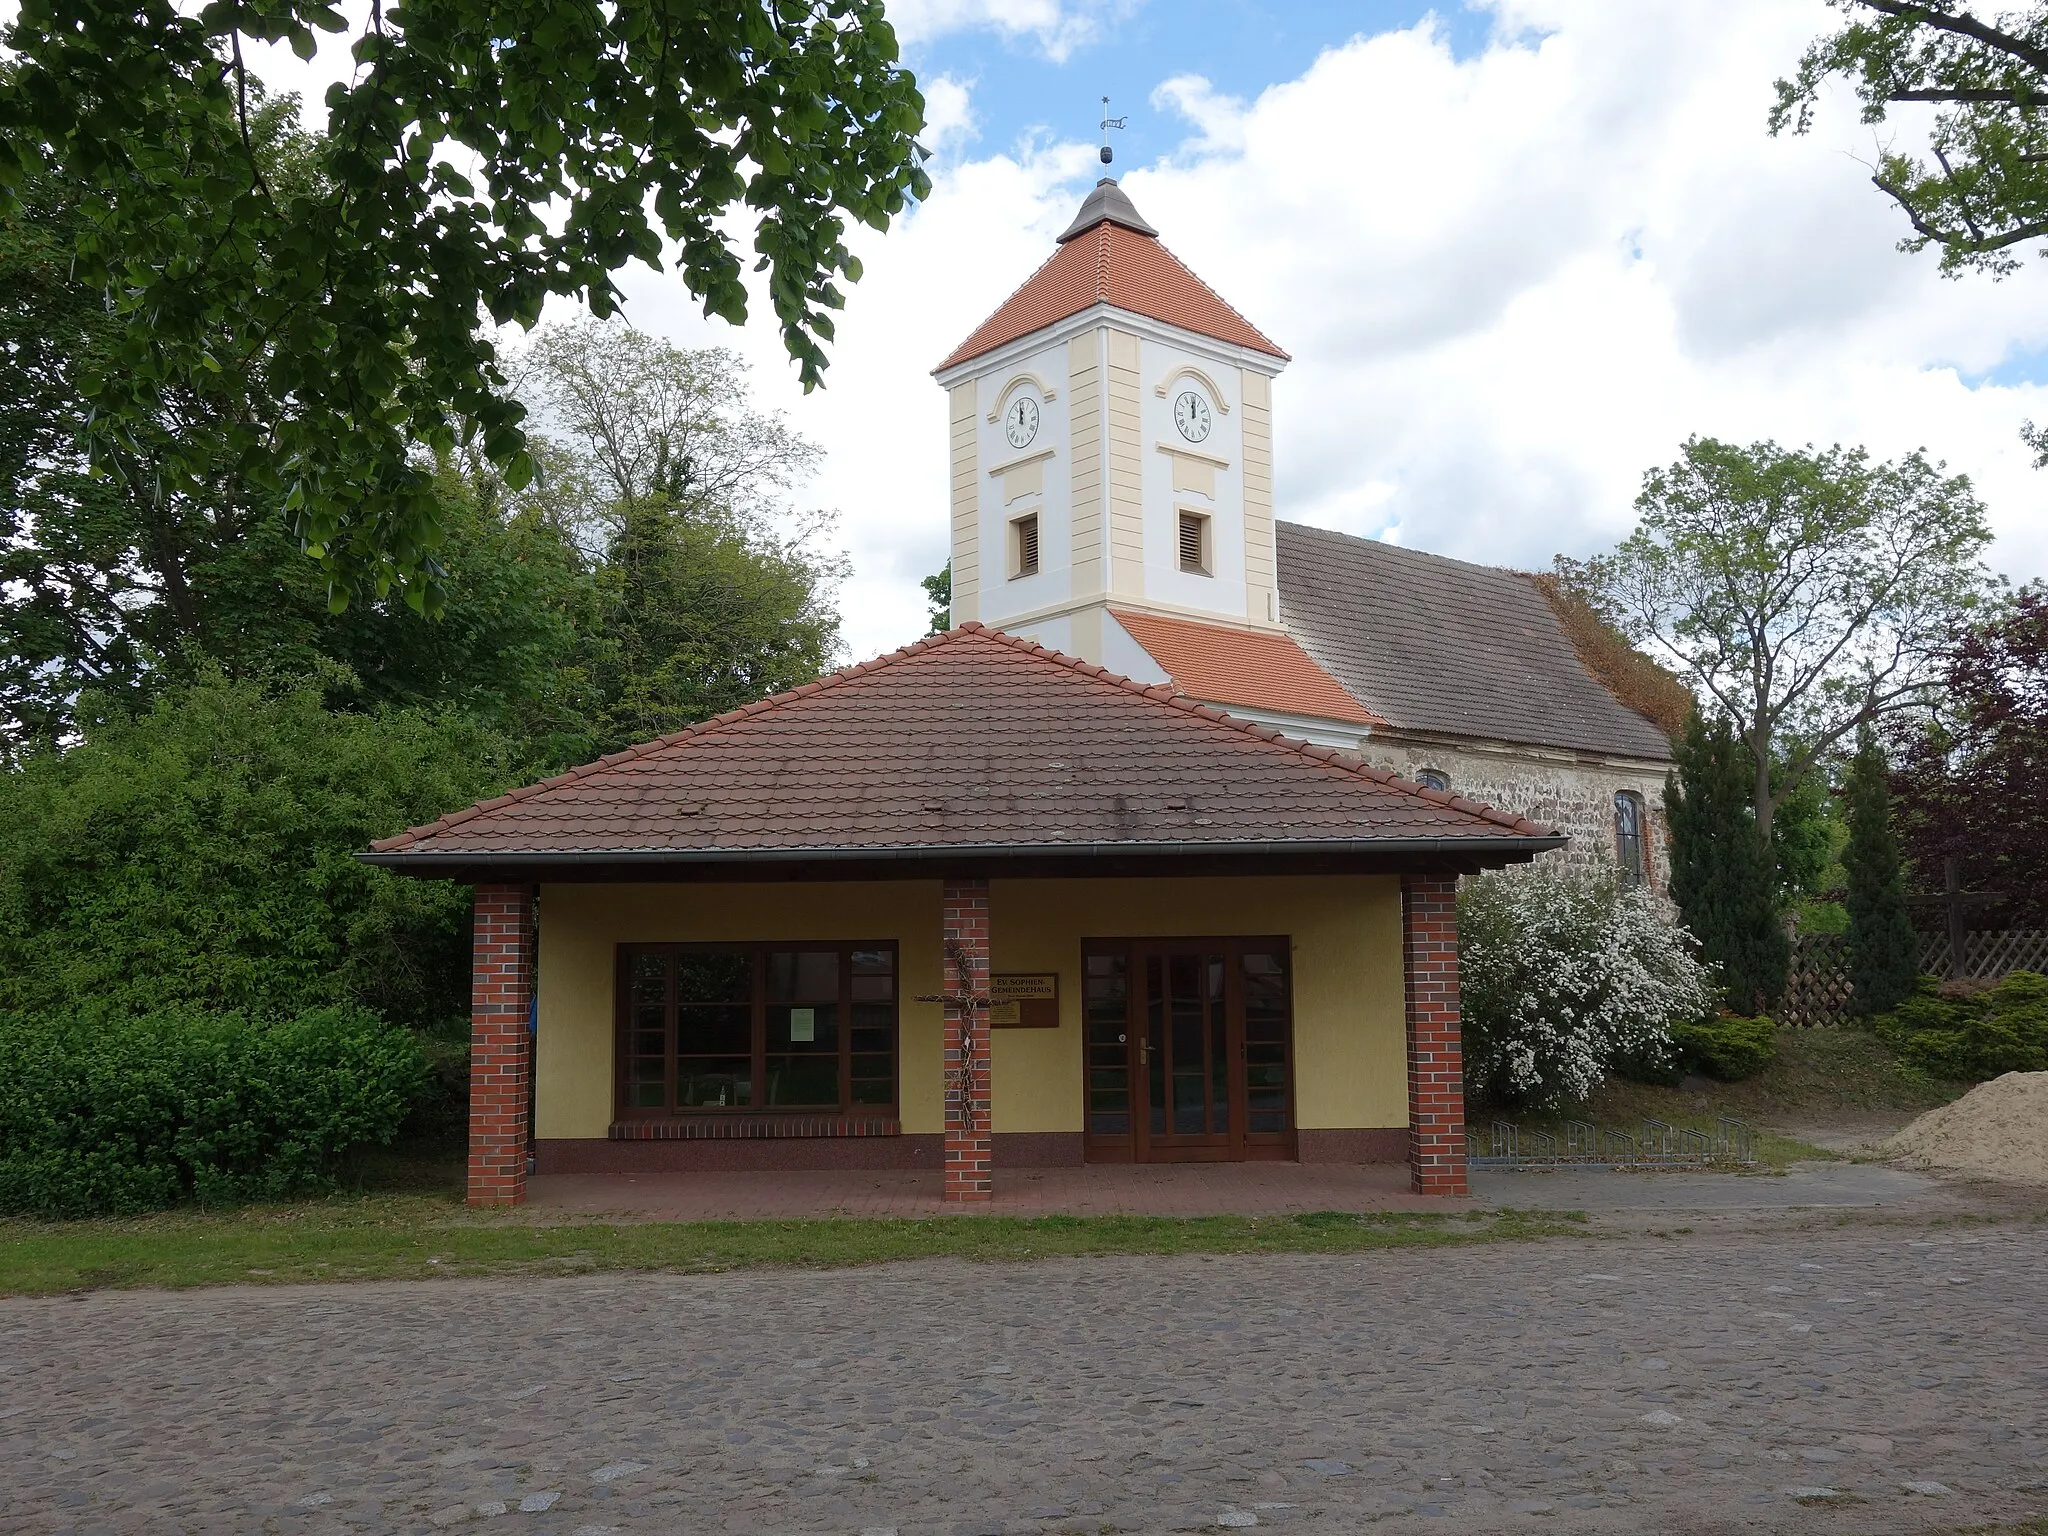 Photo showing: South-south-western view of the parish hall  in Zabelsdorf, Zehdenick municipality, Oberhavel district, Brandenburg state, Germany.